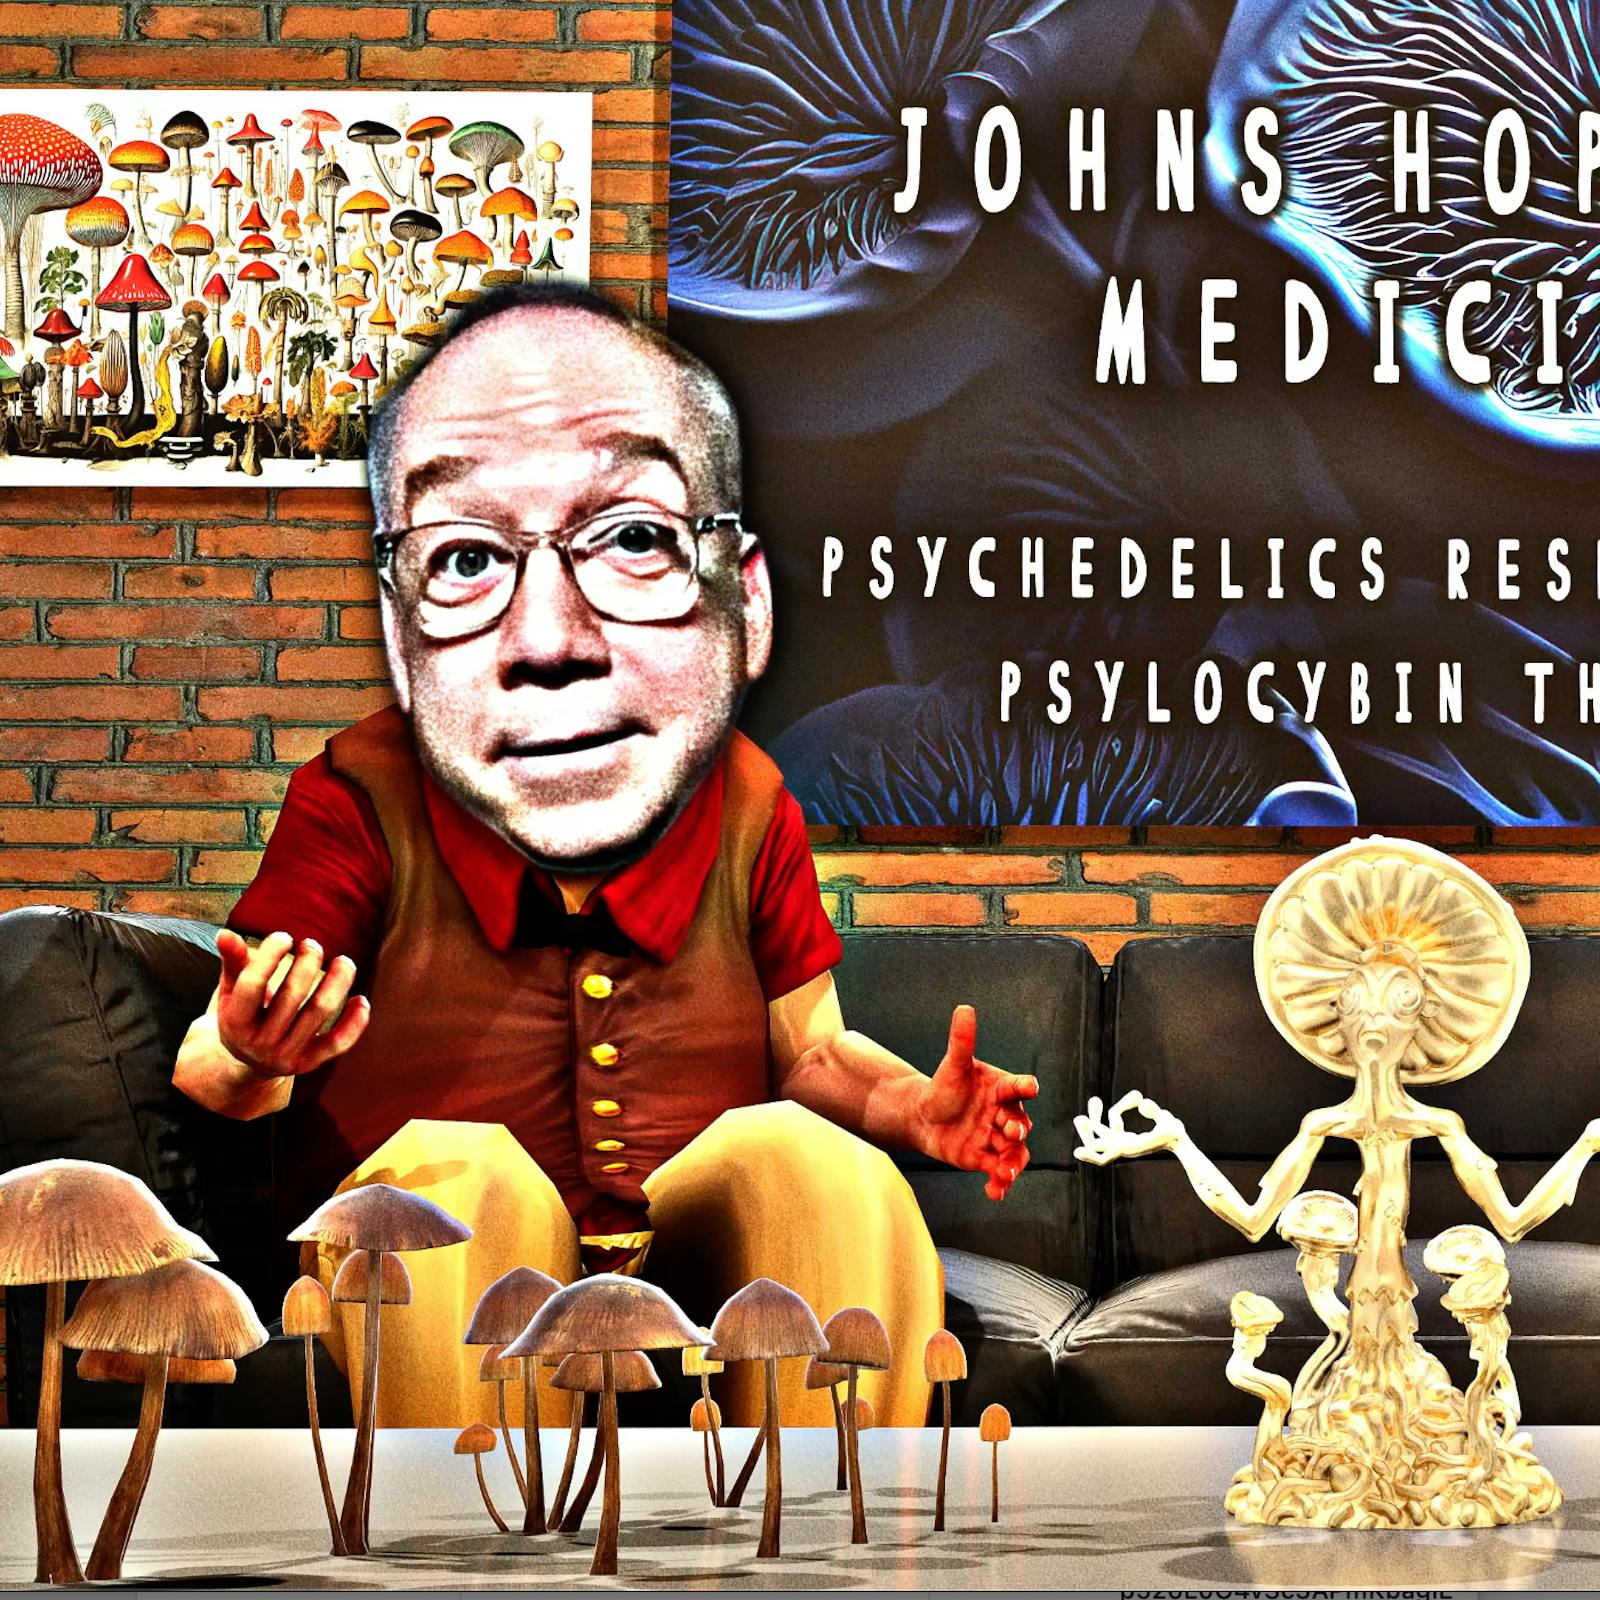 The Psychedelic Stylings of Dr. Matthew Johnson